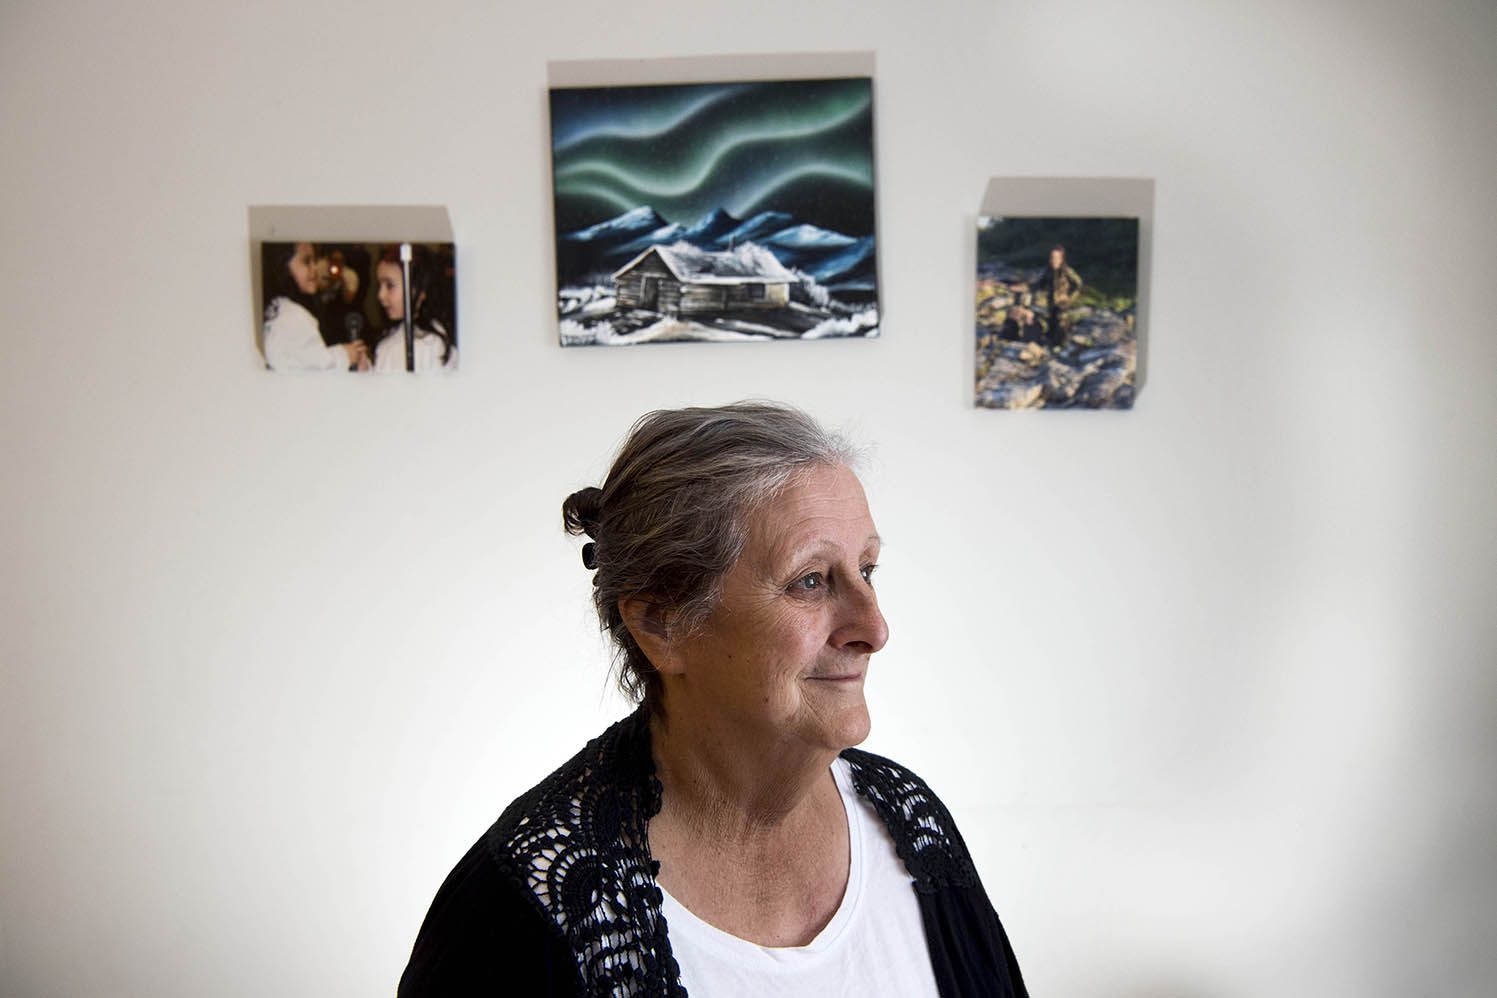 Charlotte Wolfrey, an elder and elected leader of the small Inuit community of Rigolet, in Newfoundland and Labrador, at her home on Nov. 11, 2019. Wolfrey worries that methylmercury poisoning from a recently completed hydropower project will destroy the community’s deep cultural connection to seals and other wild-caught food. Image by Michael G. Seamans. Canada, 2019.